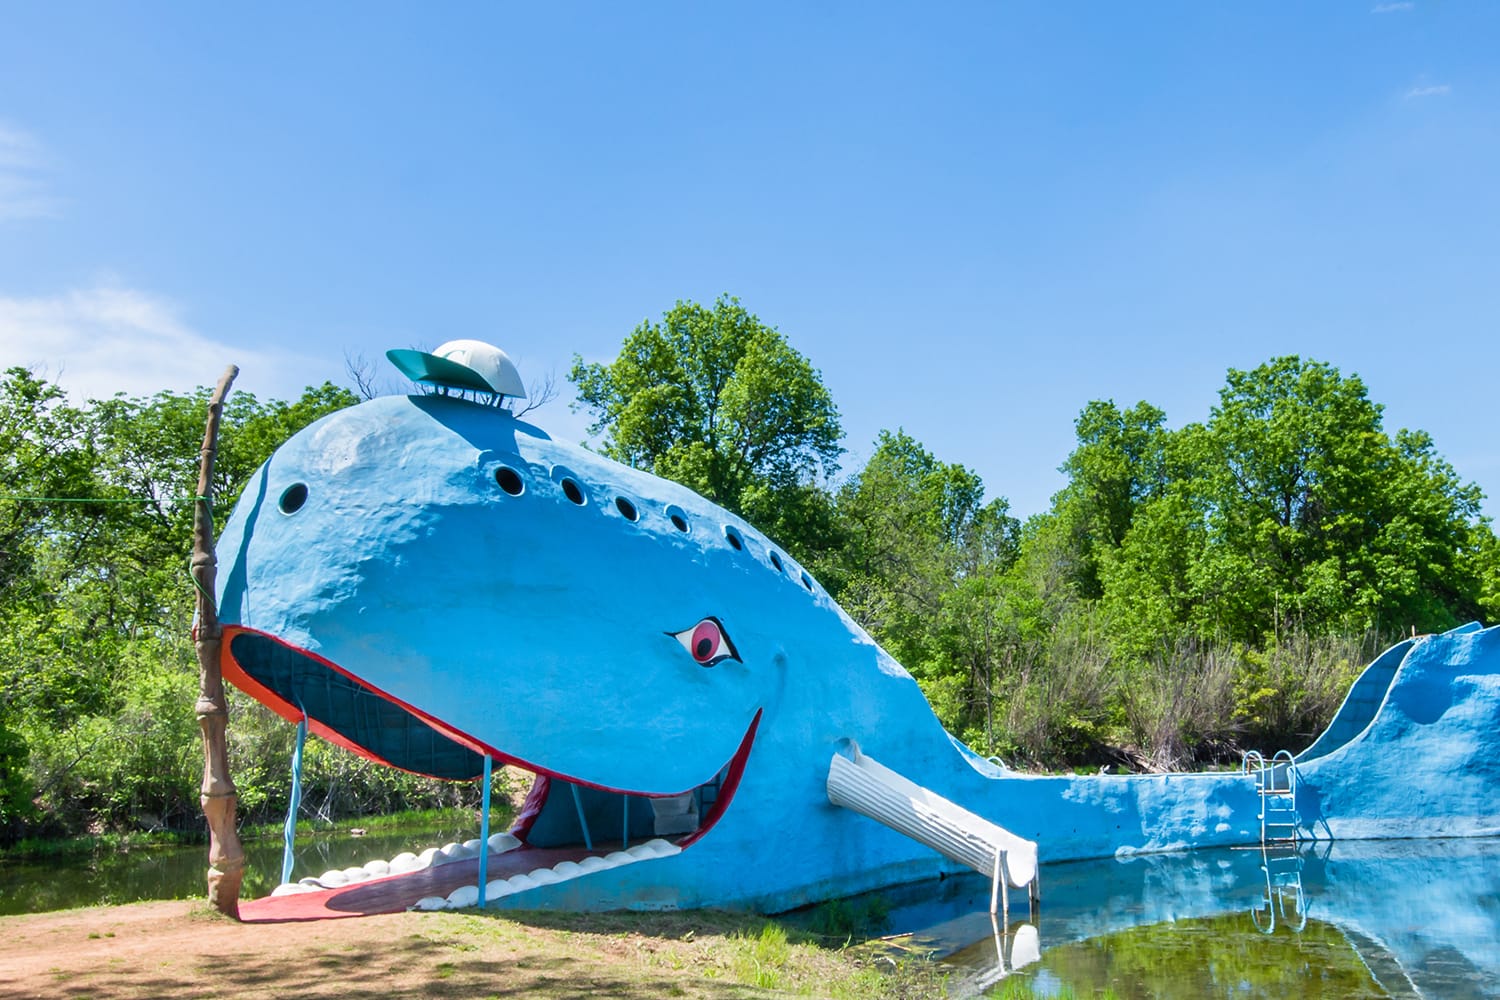 Iconic Blue Whale floating in "Natures Acres" pond, on Route 66 in Oklahoma